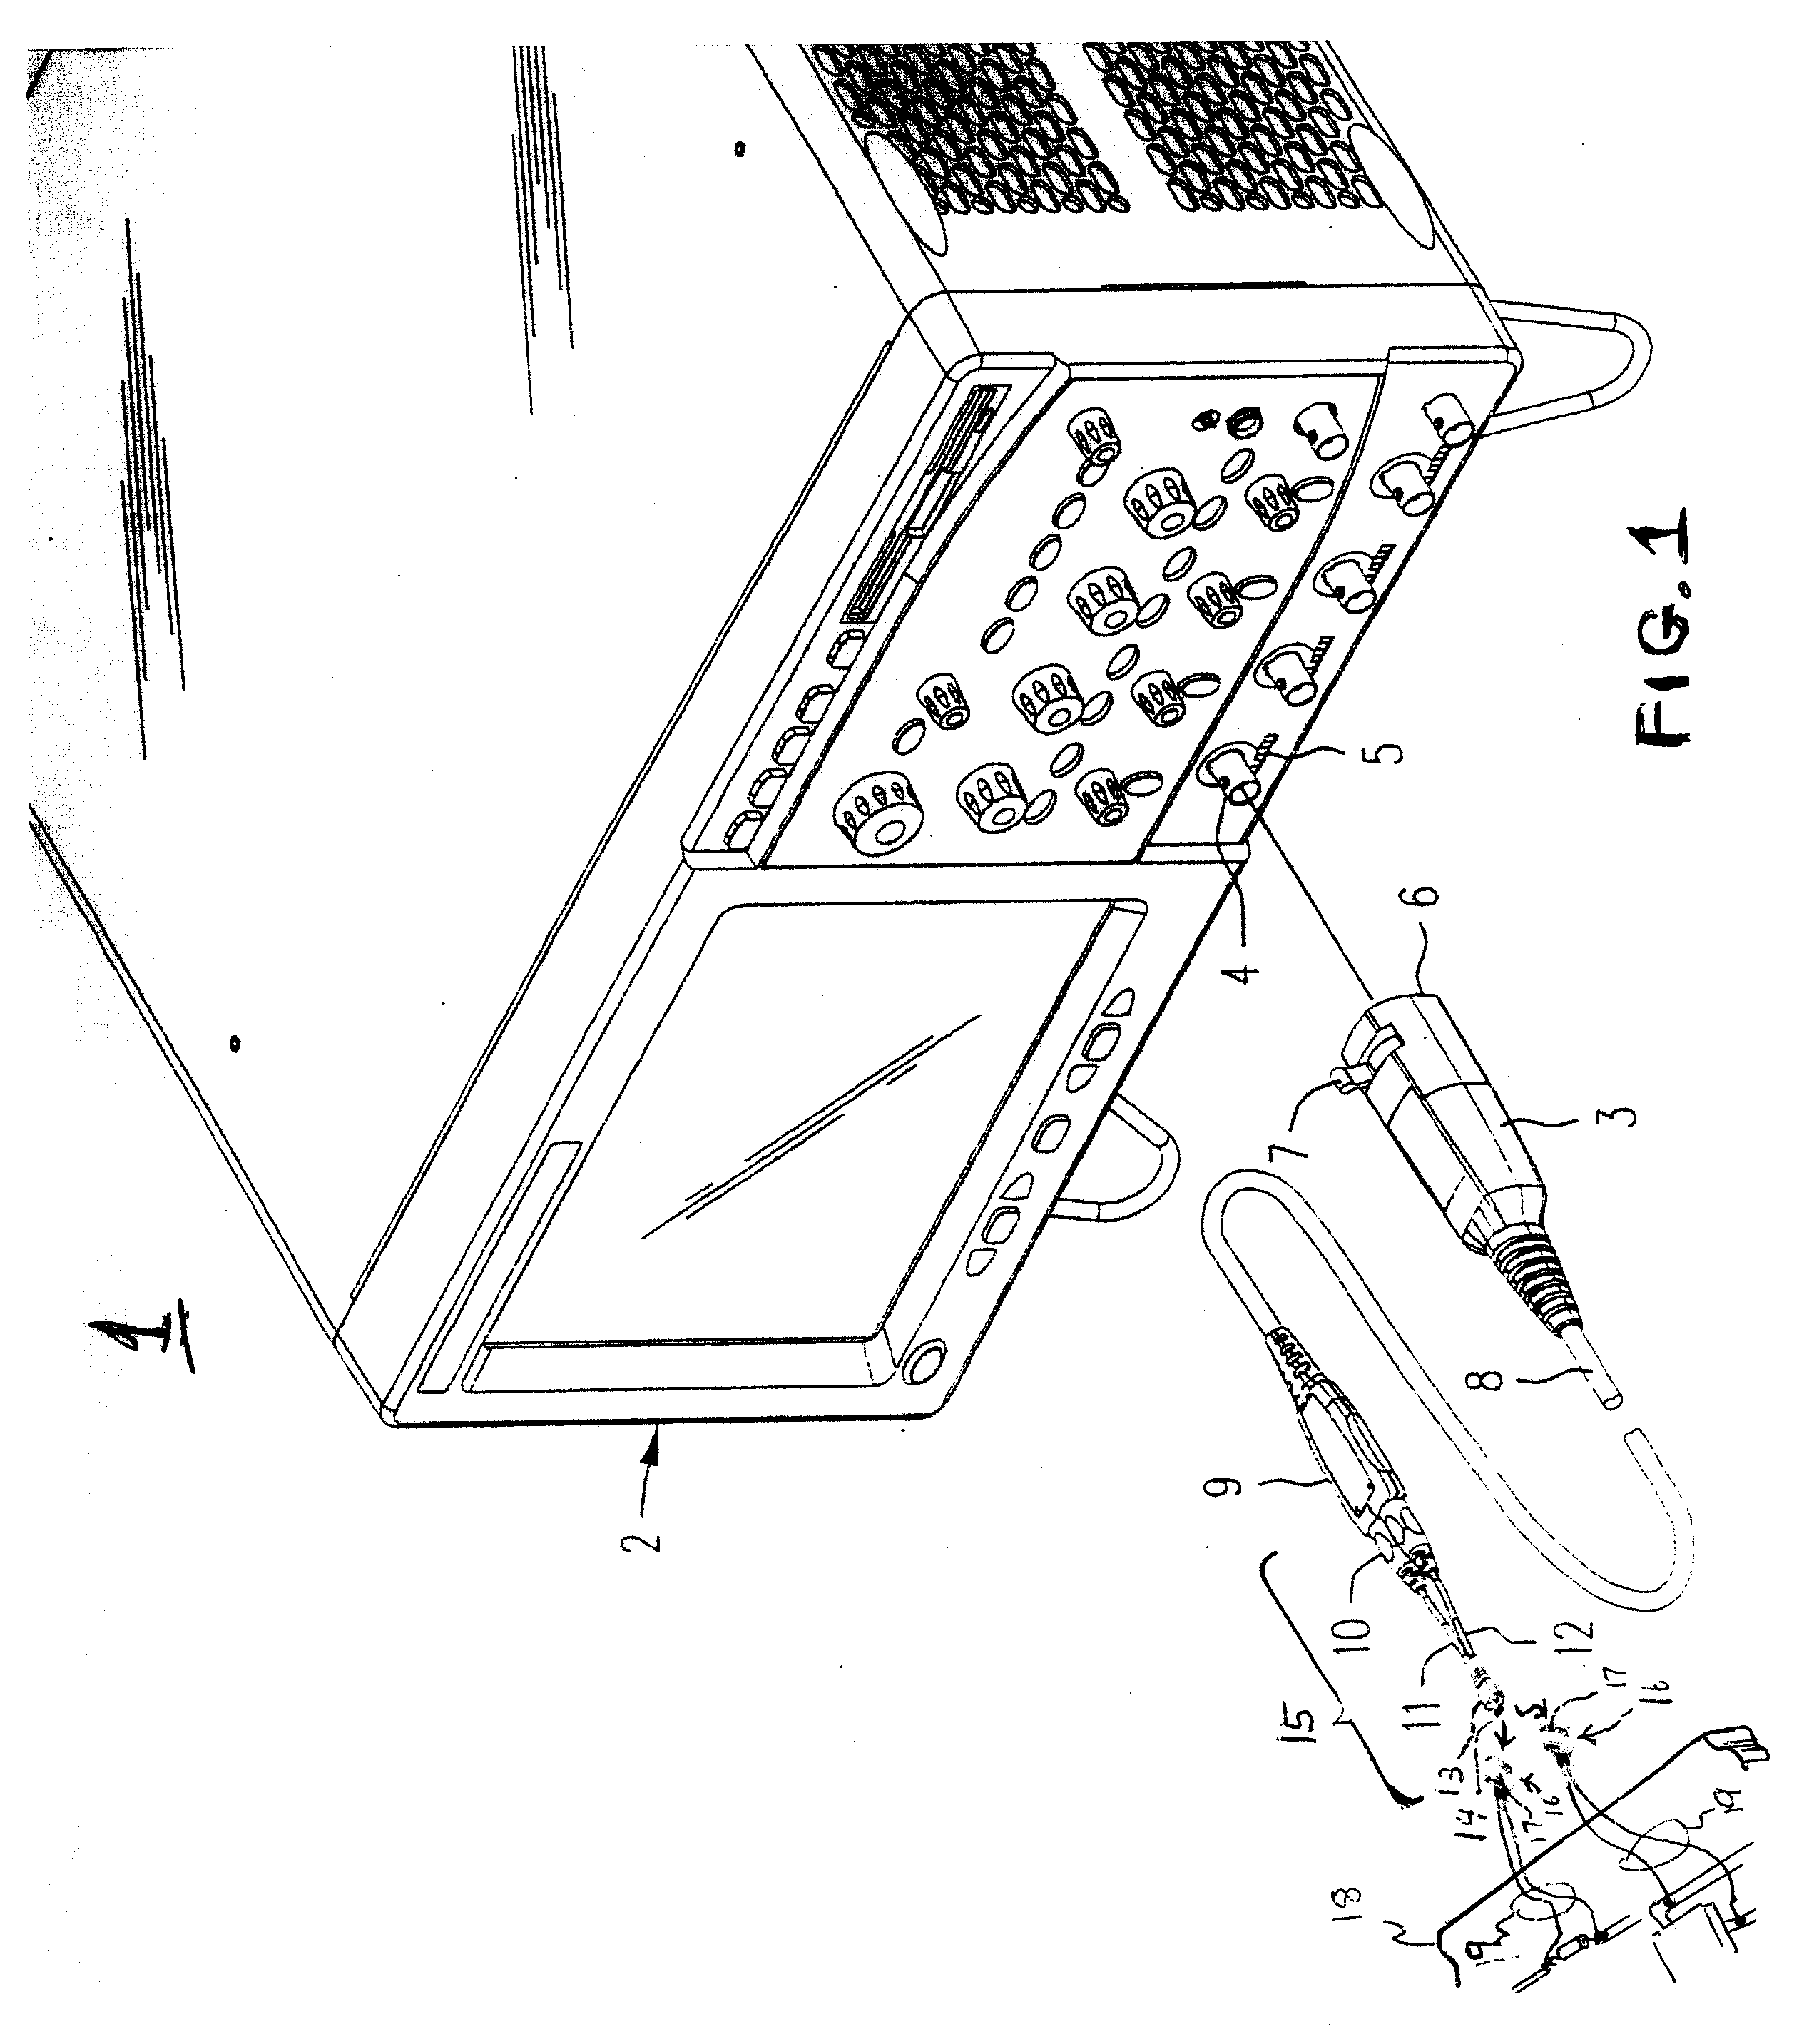 Zif connection accessory and zif browser for an electronic probe